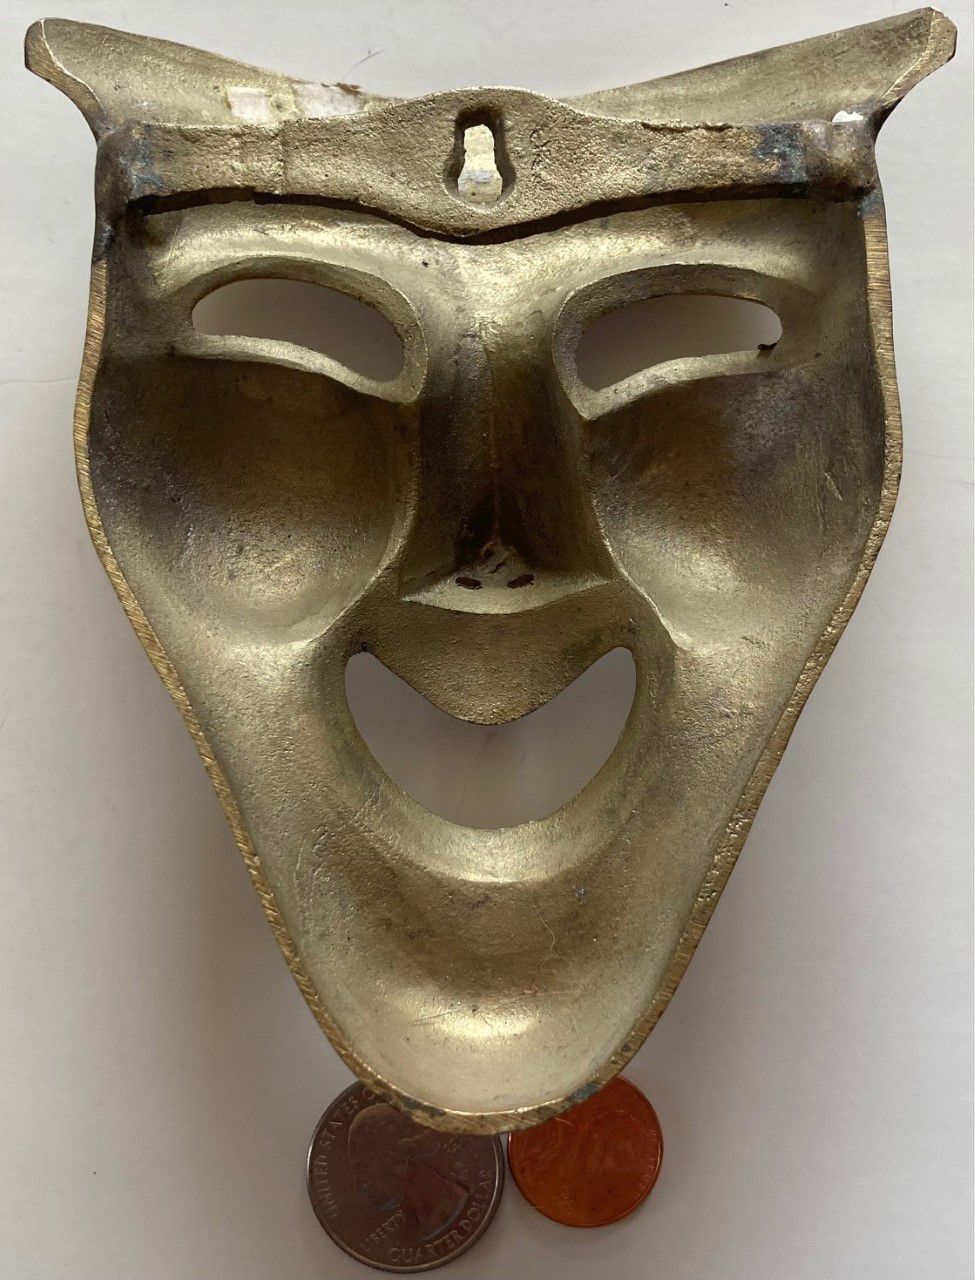 Vintage Metal Brass Wall Hanging Face Mask, Heavy Duty Metal, Quality, 5" Tall, Home Decor, Wall Decor, Shelf Display, This Can Be Shined Up Even More